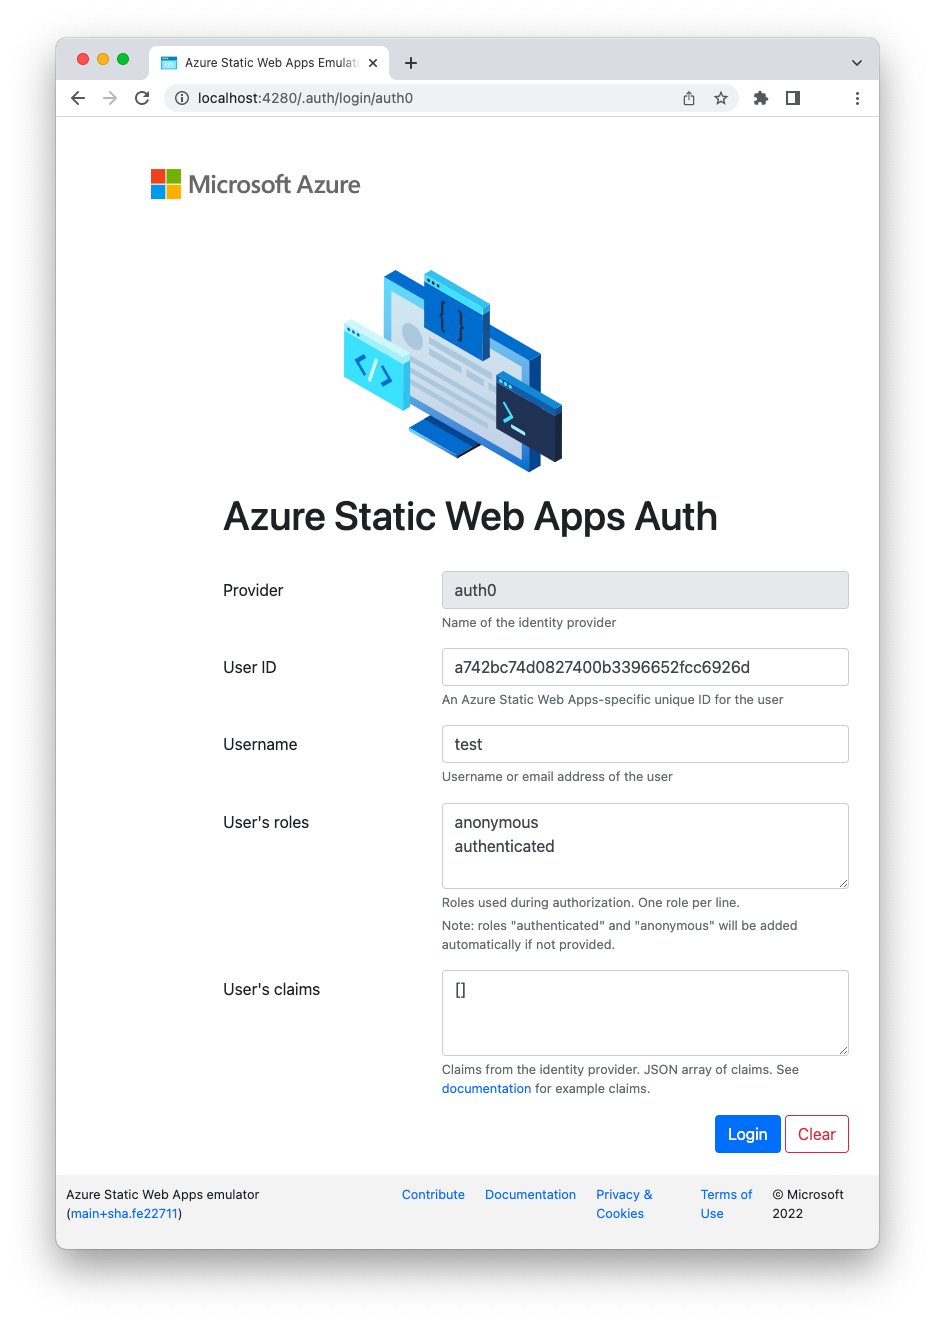 Emulated Auth0 login page for Azure SWA